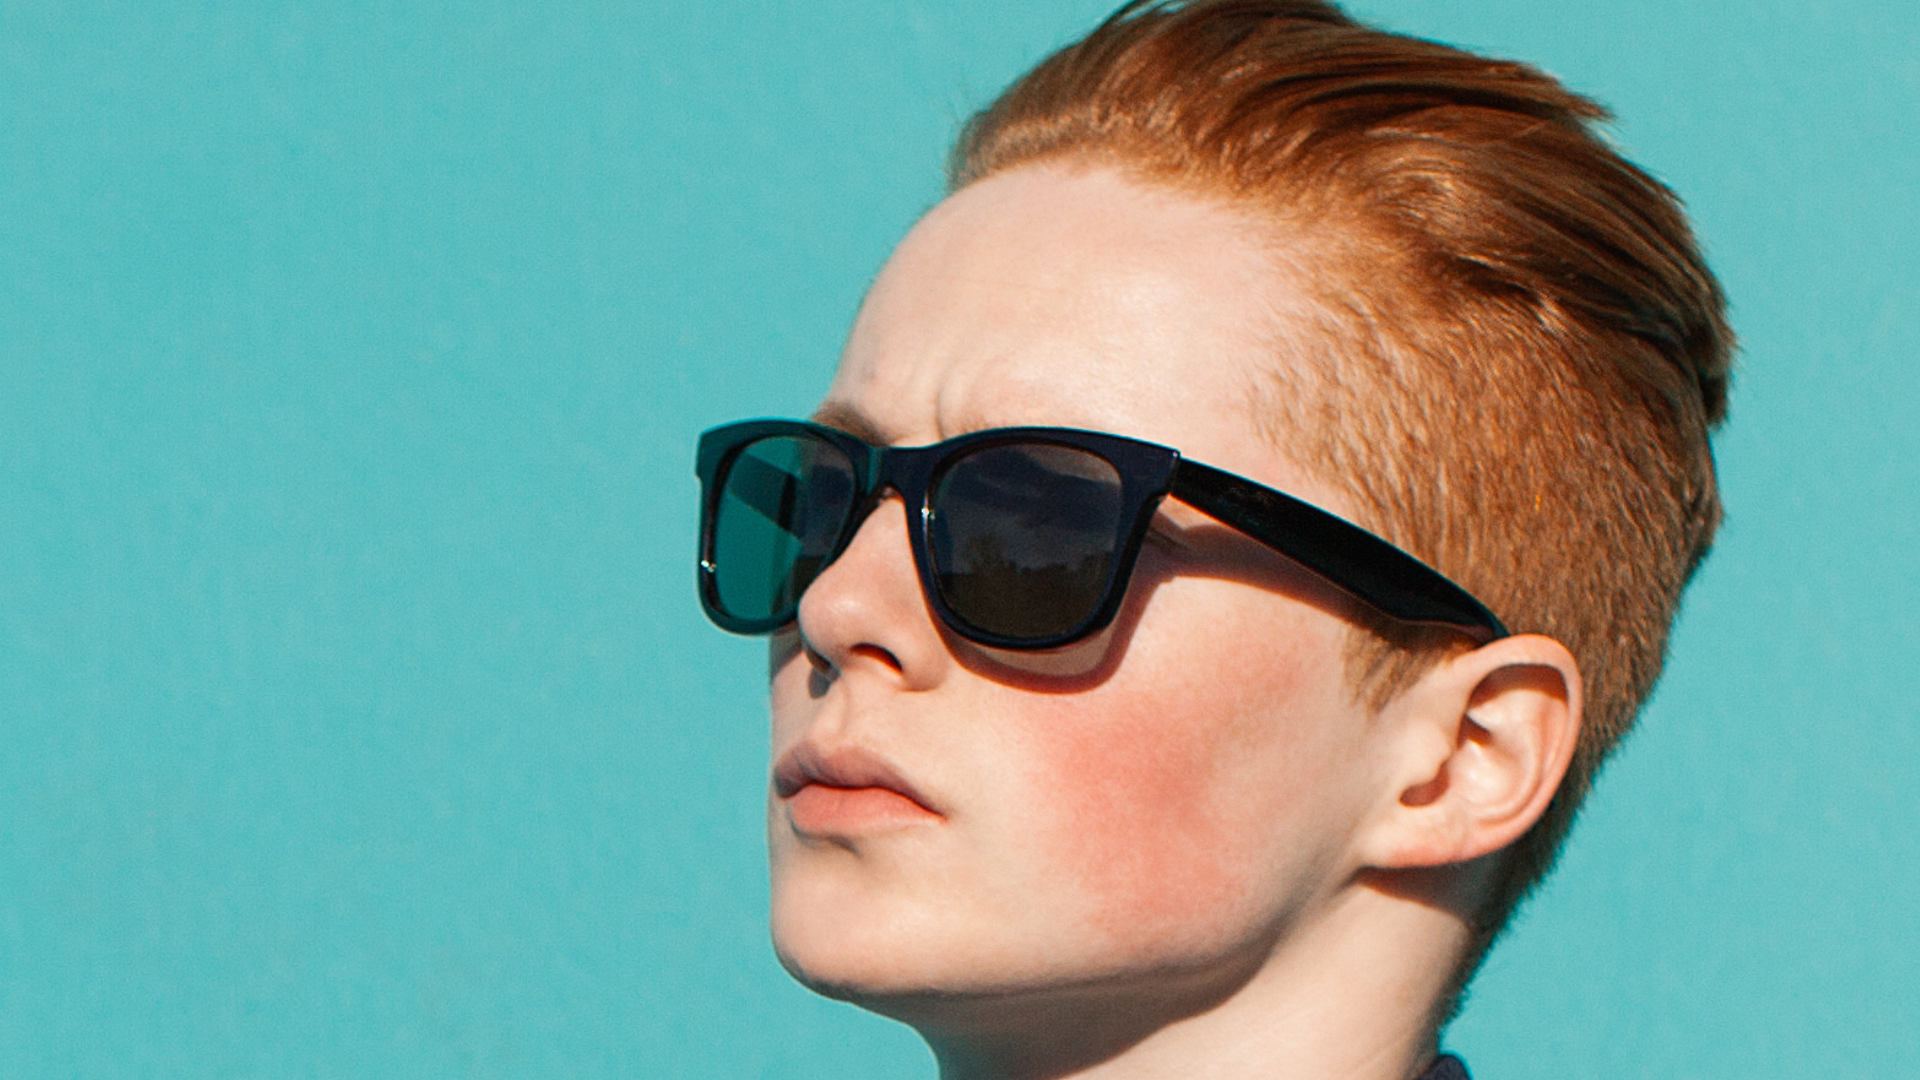 Why Aren’t Men, Specifically Redhead Men, Wearing Sunscreen?